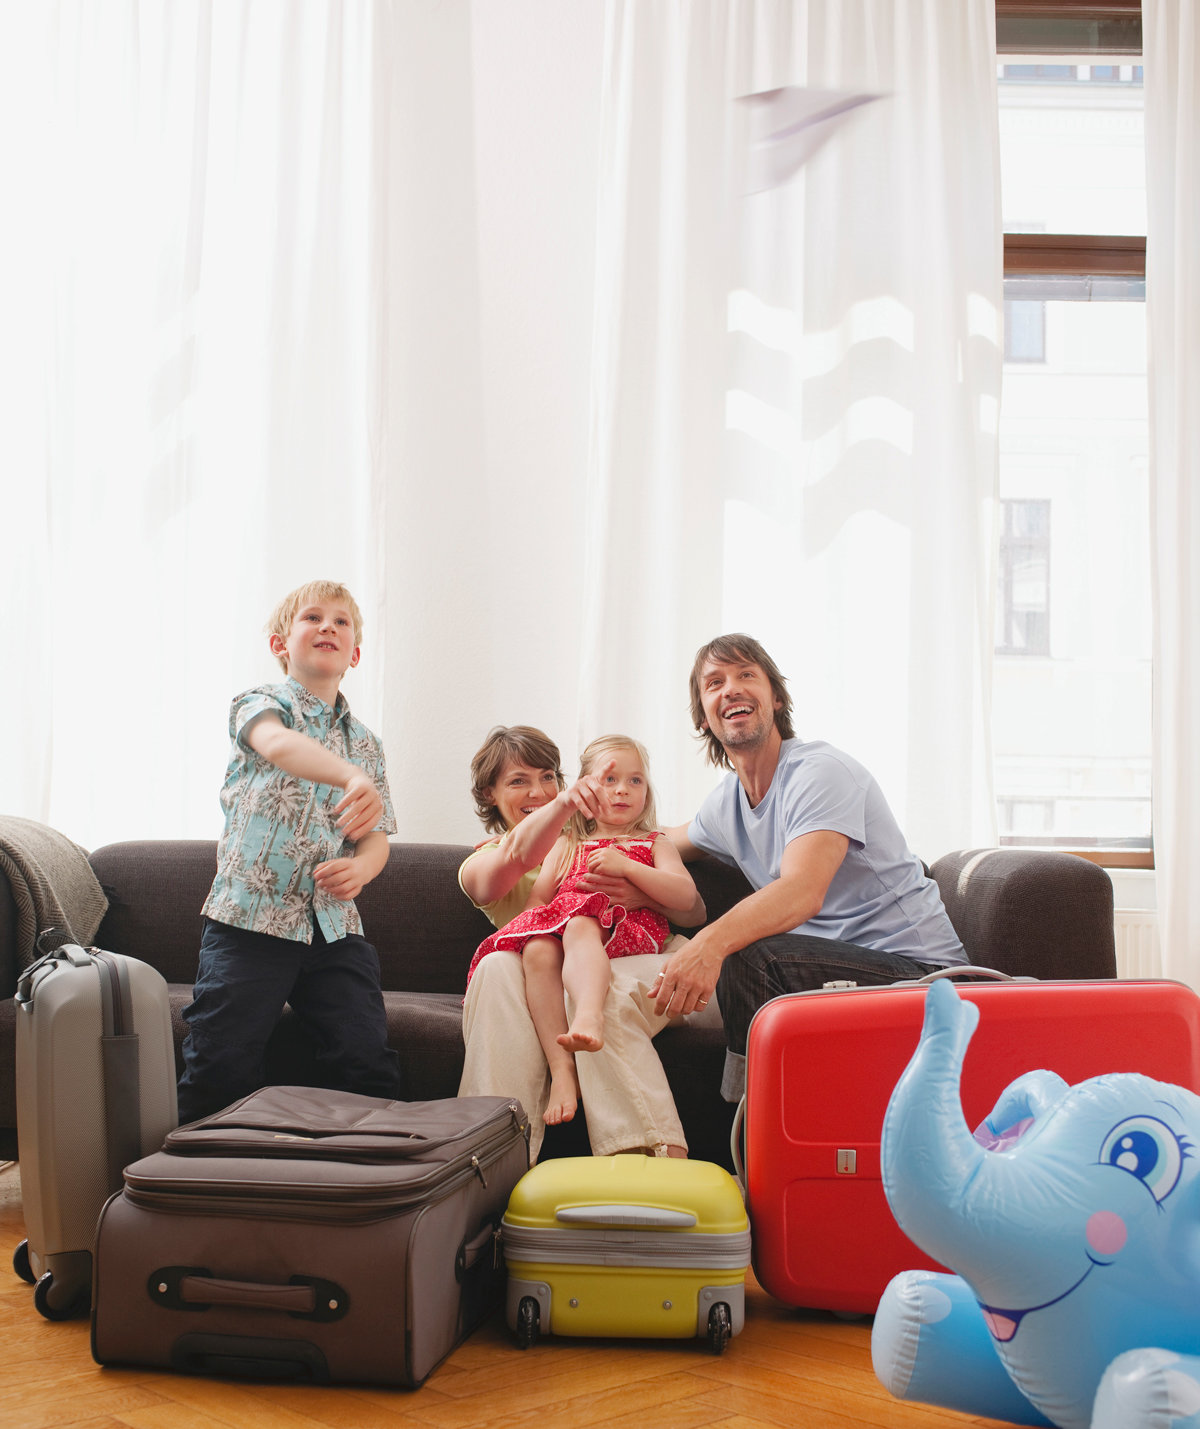 How to Safely Use Airbnb for Your Next Family Vacation